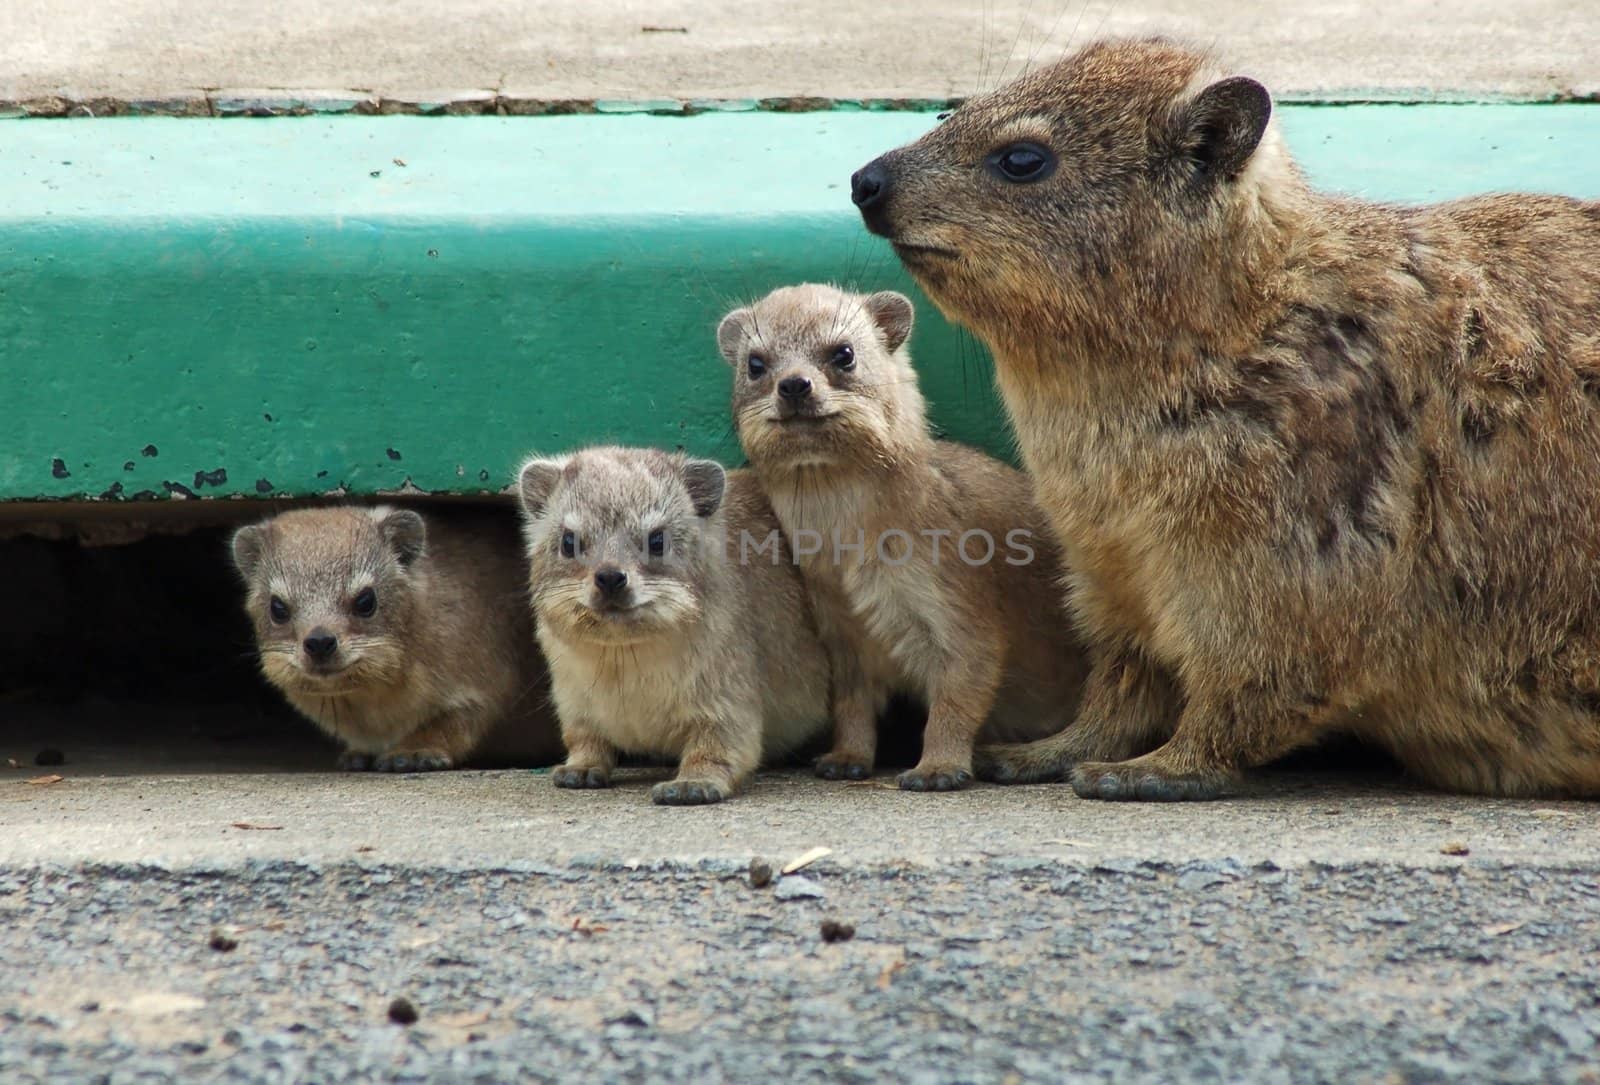 Cape Hyrax, or Rock Hyrax, (Procavia capensis) by ChrisKruger